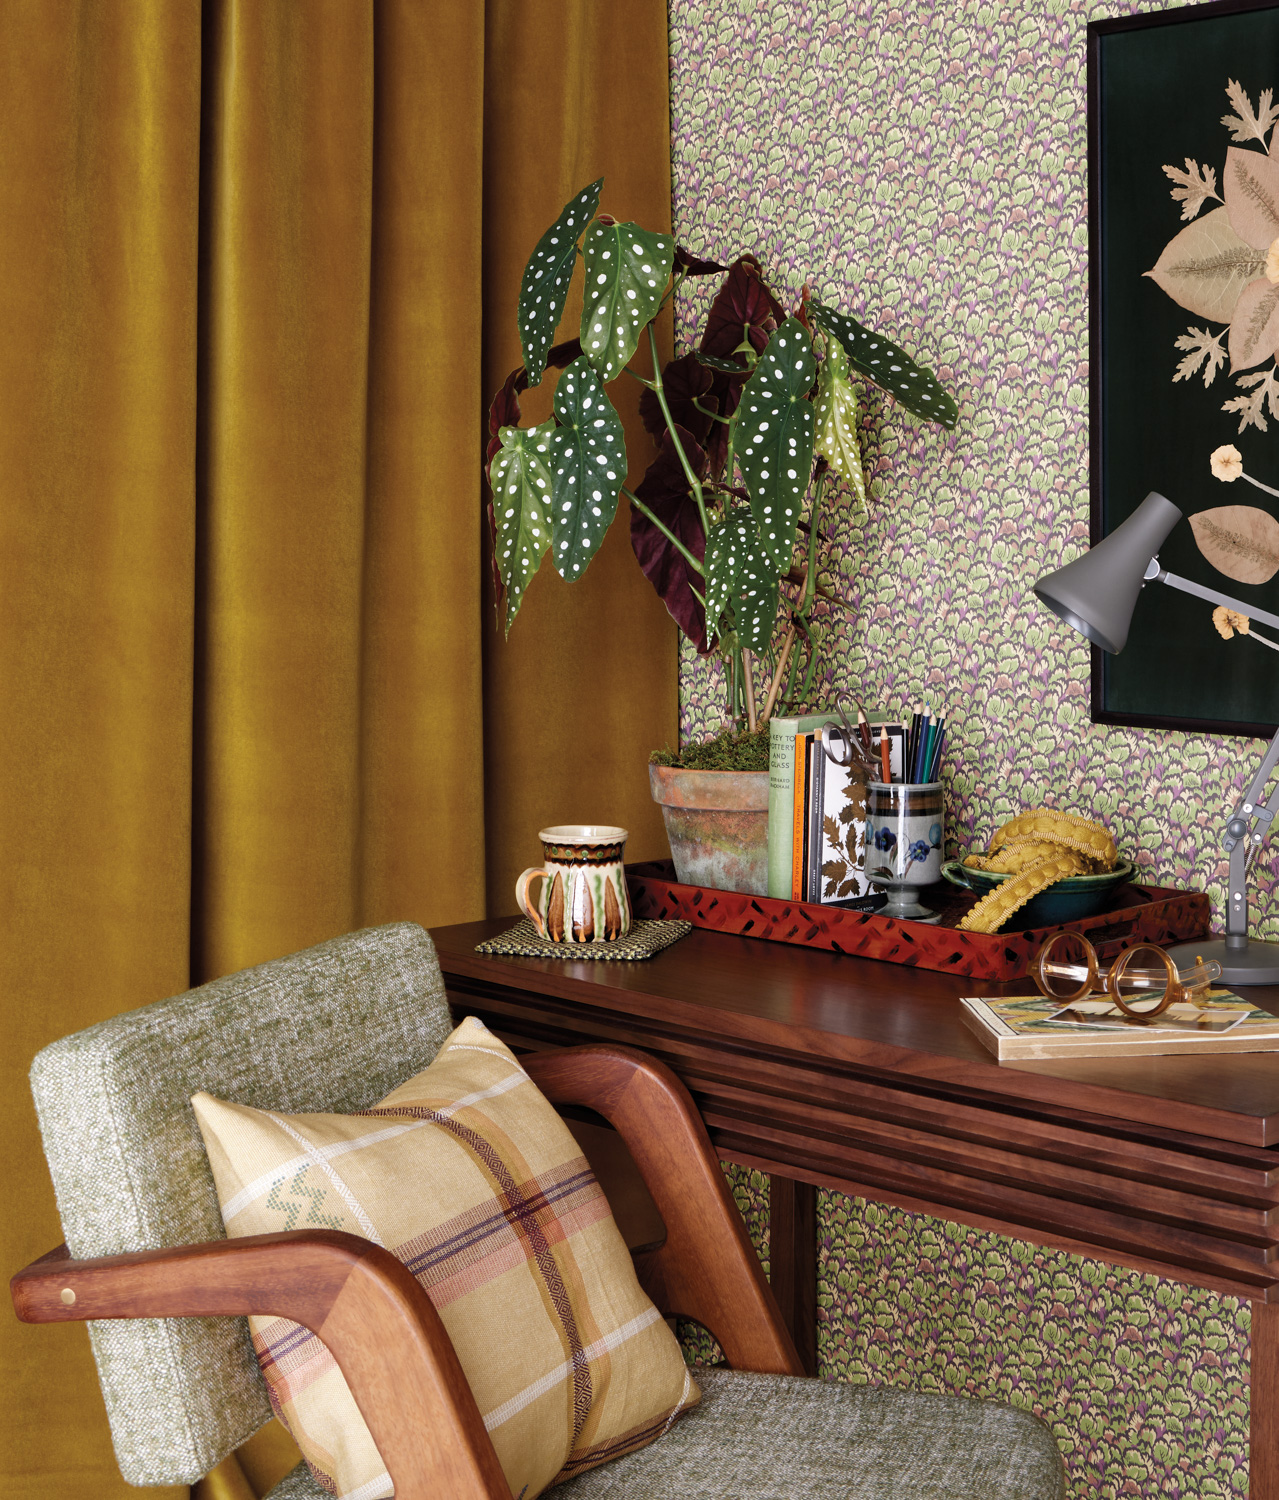 A cozy corner with a wooden desk, green and pink patterned wallpaper, and a yellow velvet curtain